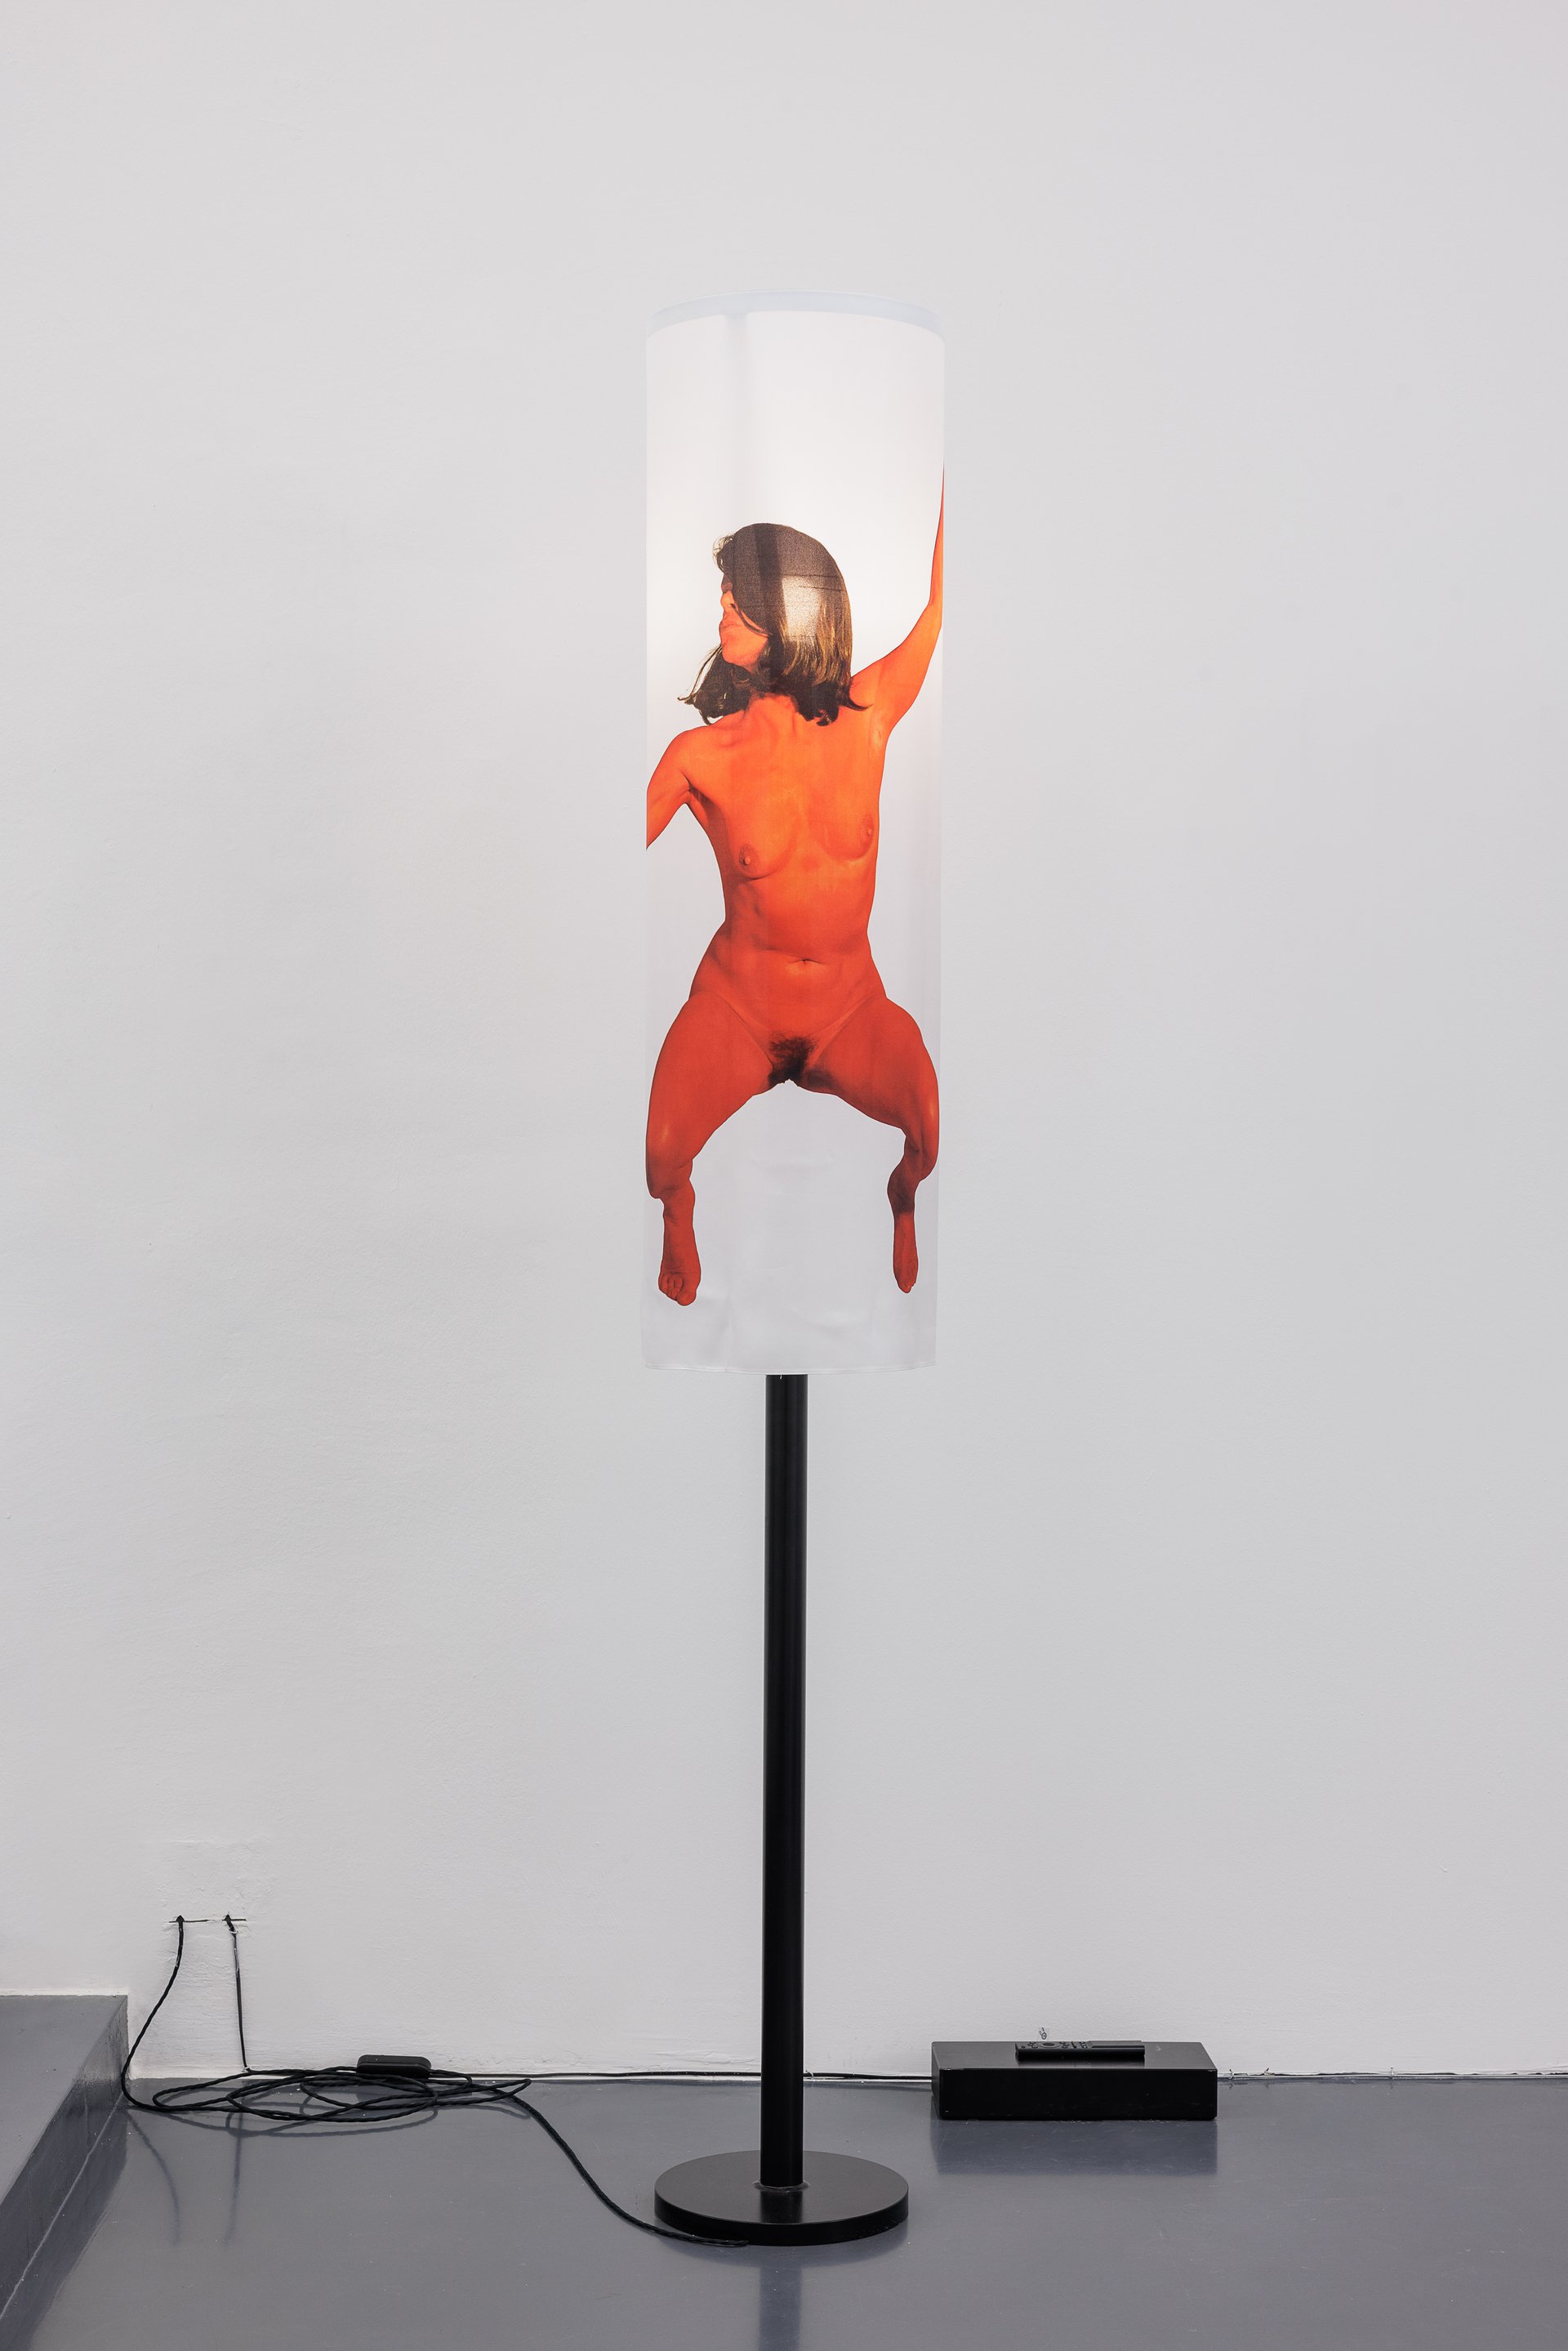 Lili Reynaud-DewarI invited men into my hotel room and asked them very personal questions about their lives, 2022Lacquered metal, printed silk, light bulb214.5 x 30 (d) cm